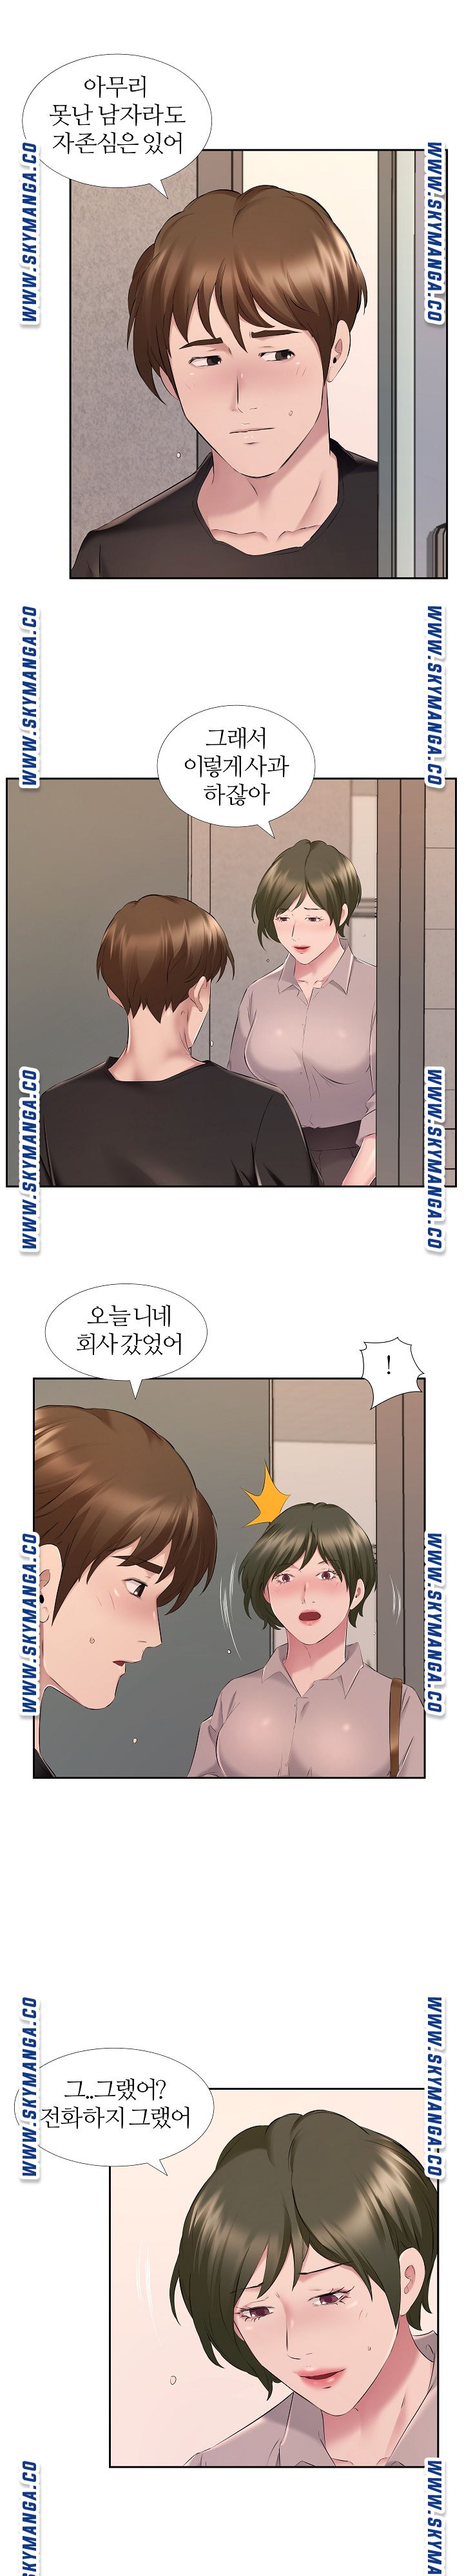 One Room Hotel Raw - Chapter 7 Page 3